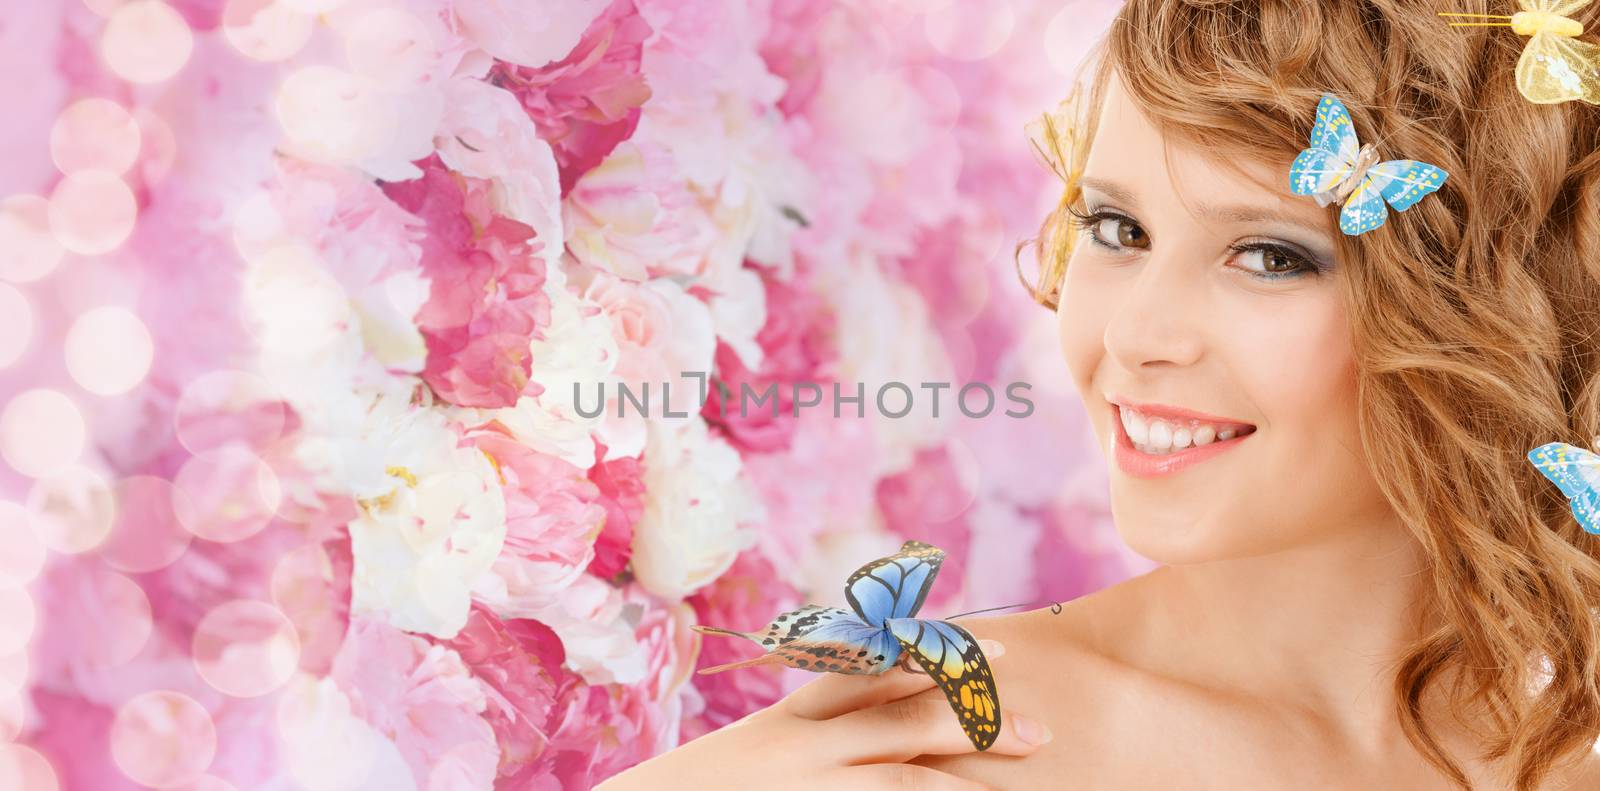 health and beauty concept - happy teenage girl with butterflies in hair and one sitting on her hand